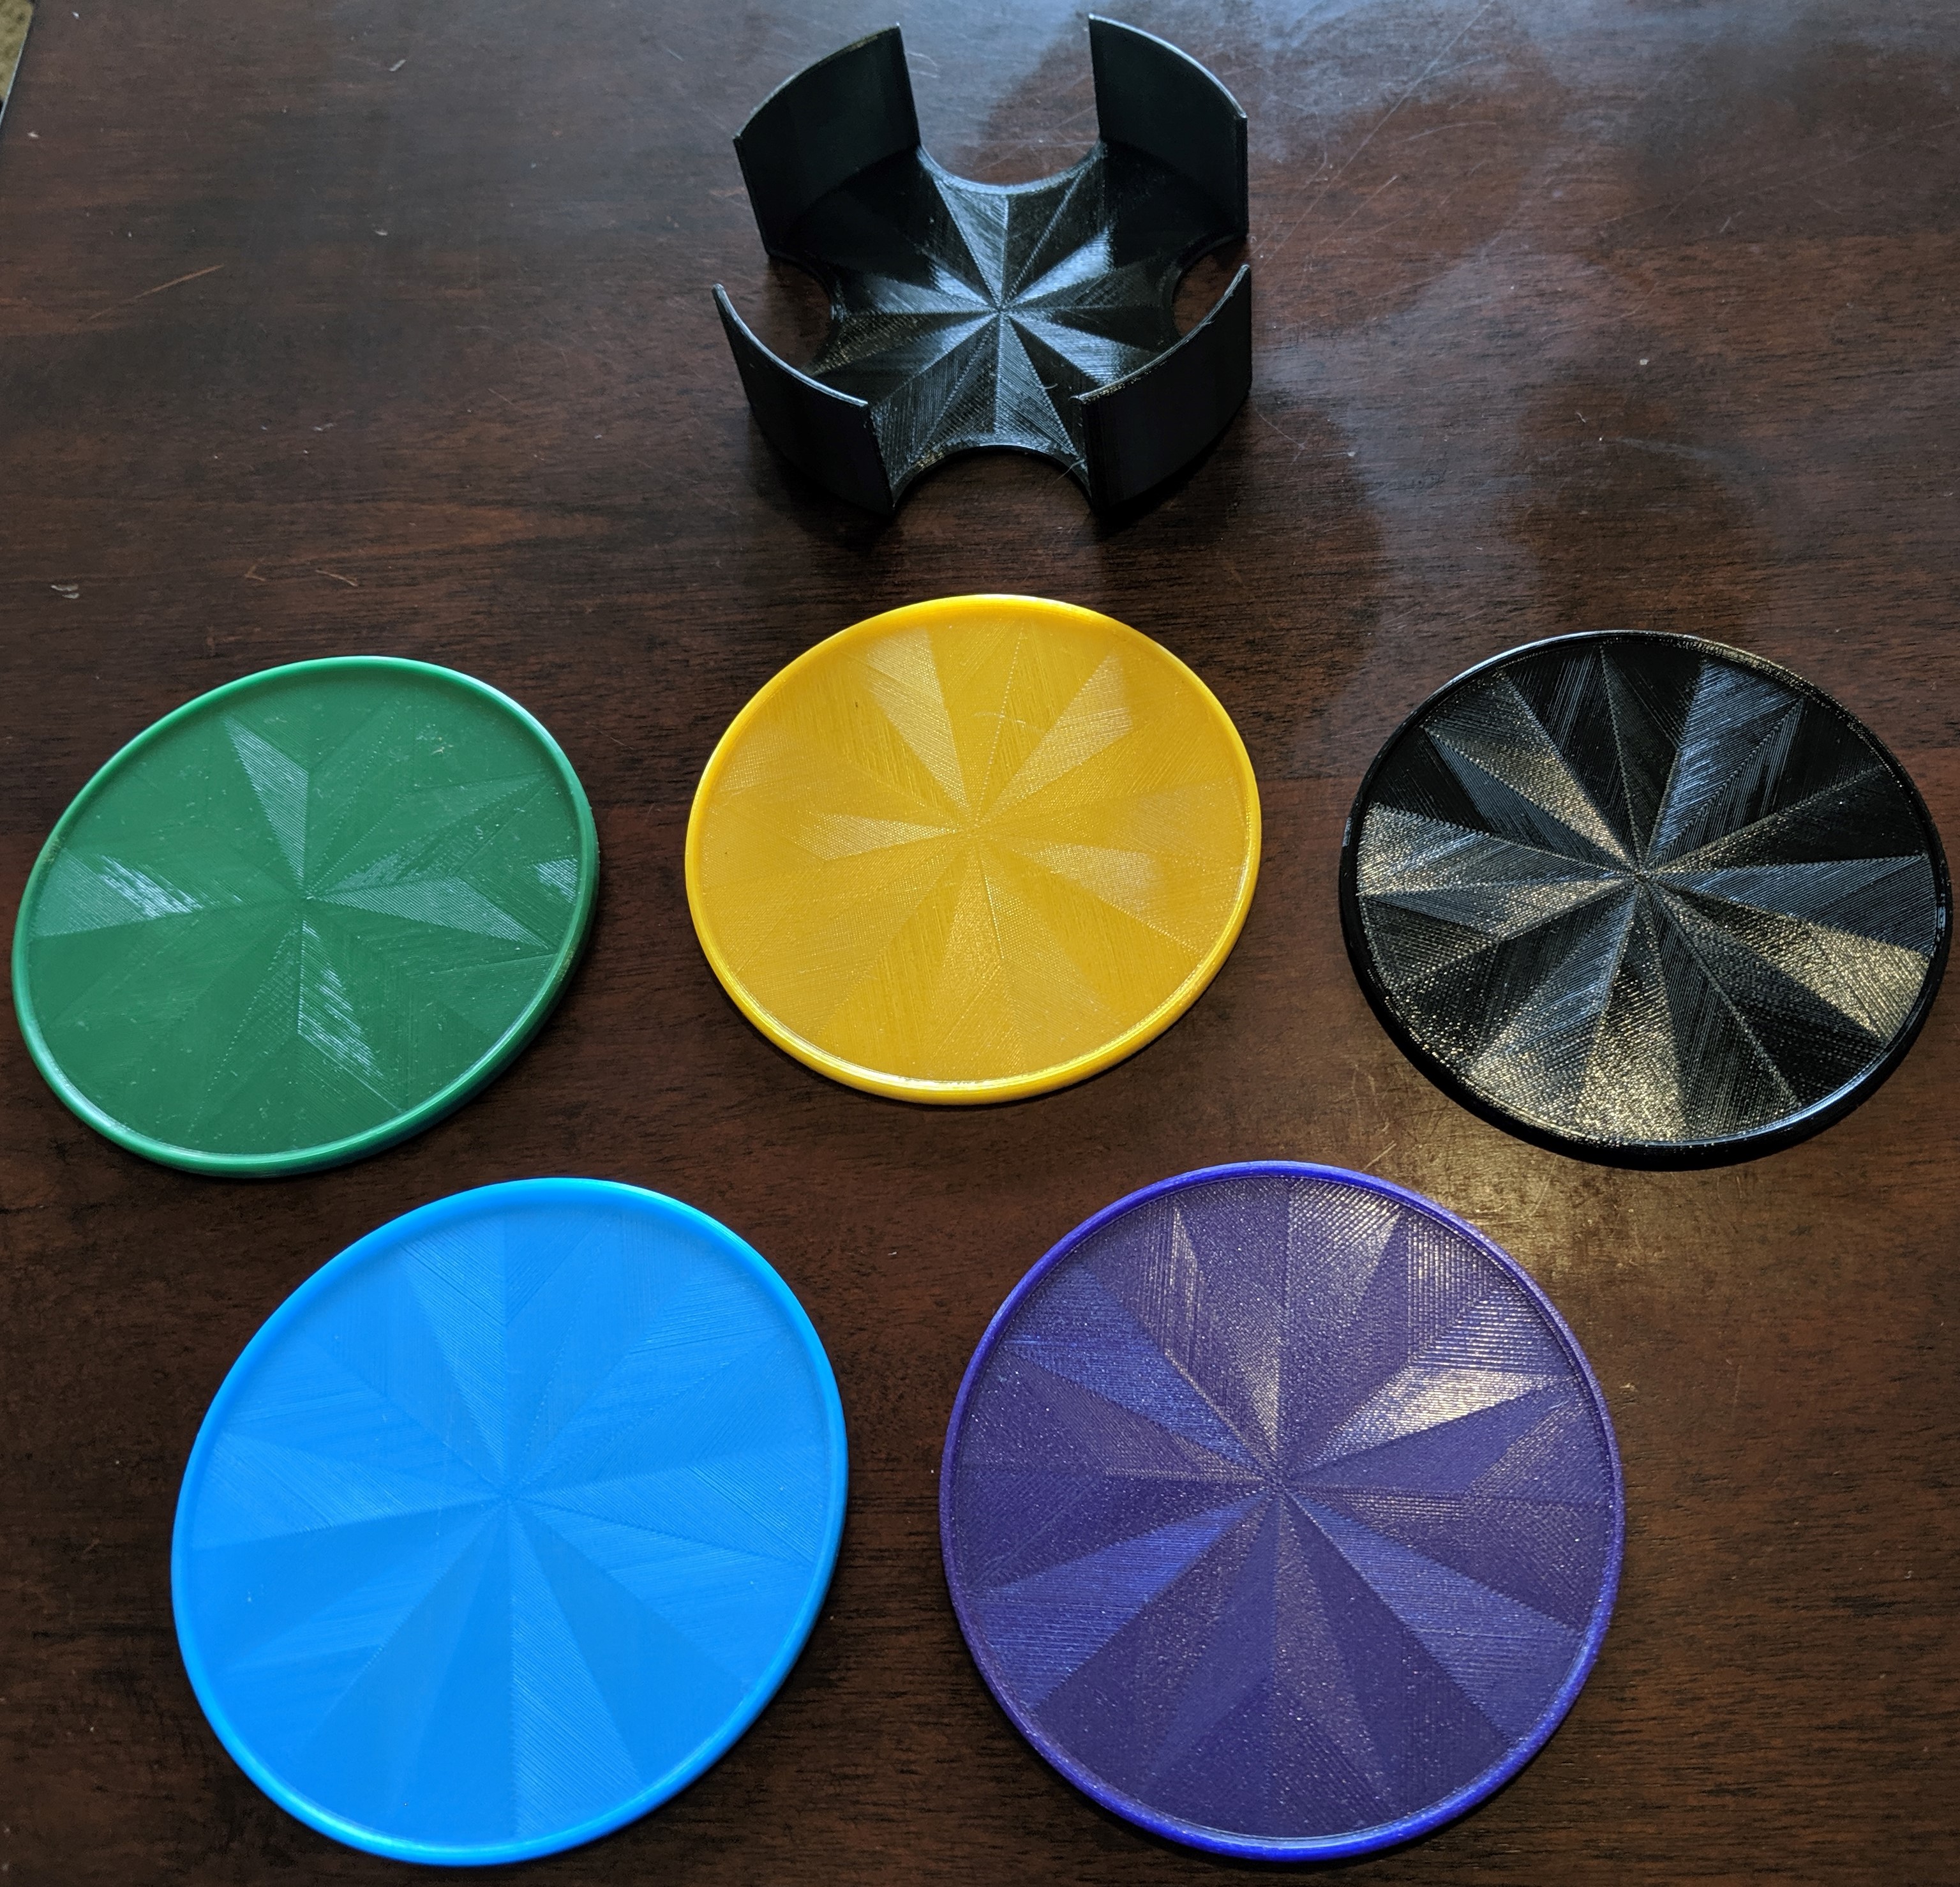 Simple Drink Coasters ready for SVGs with Coaster Holder